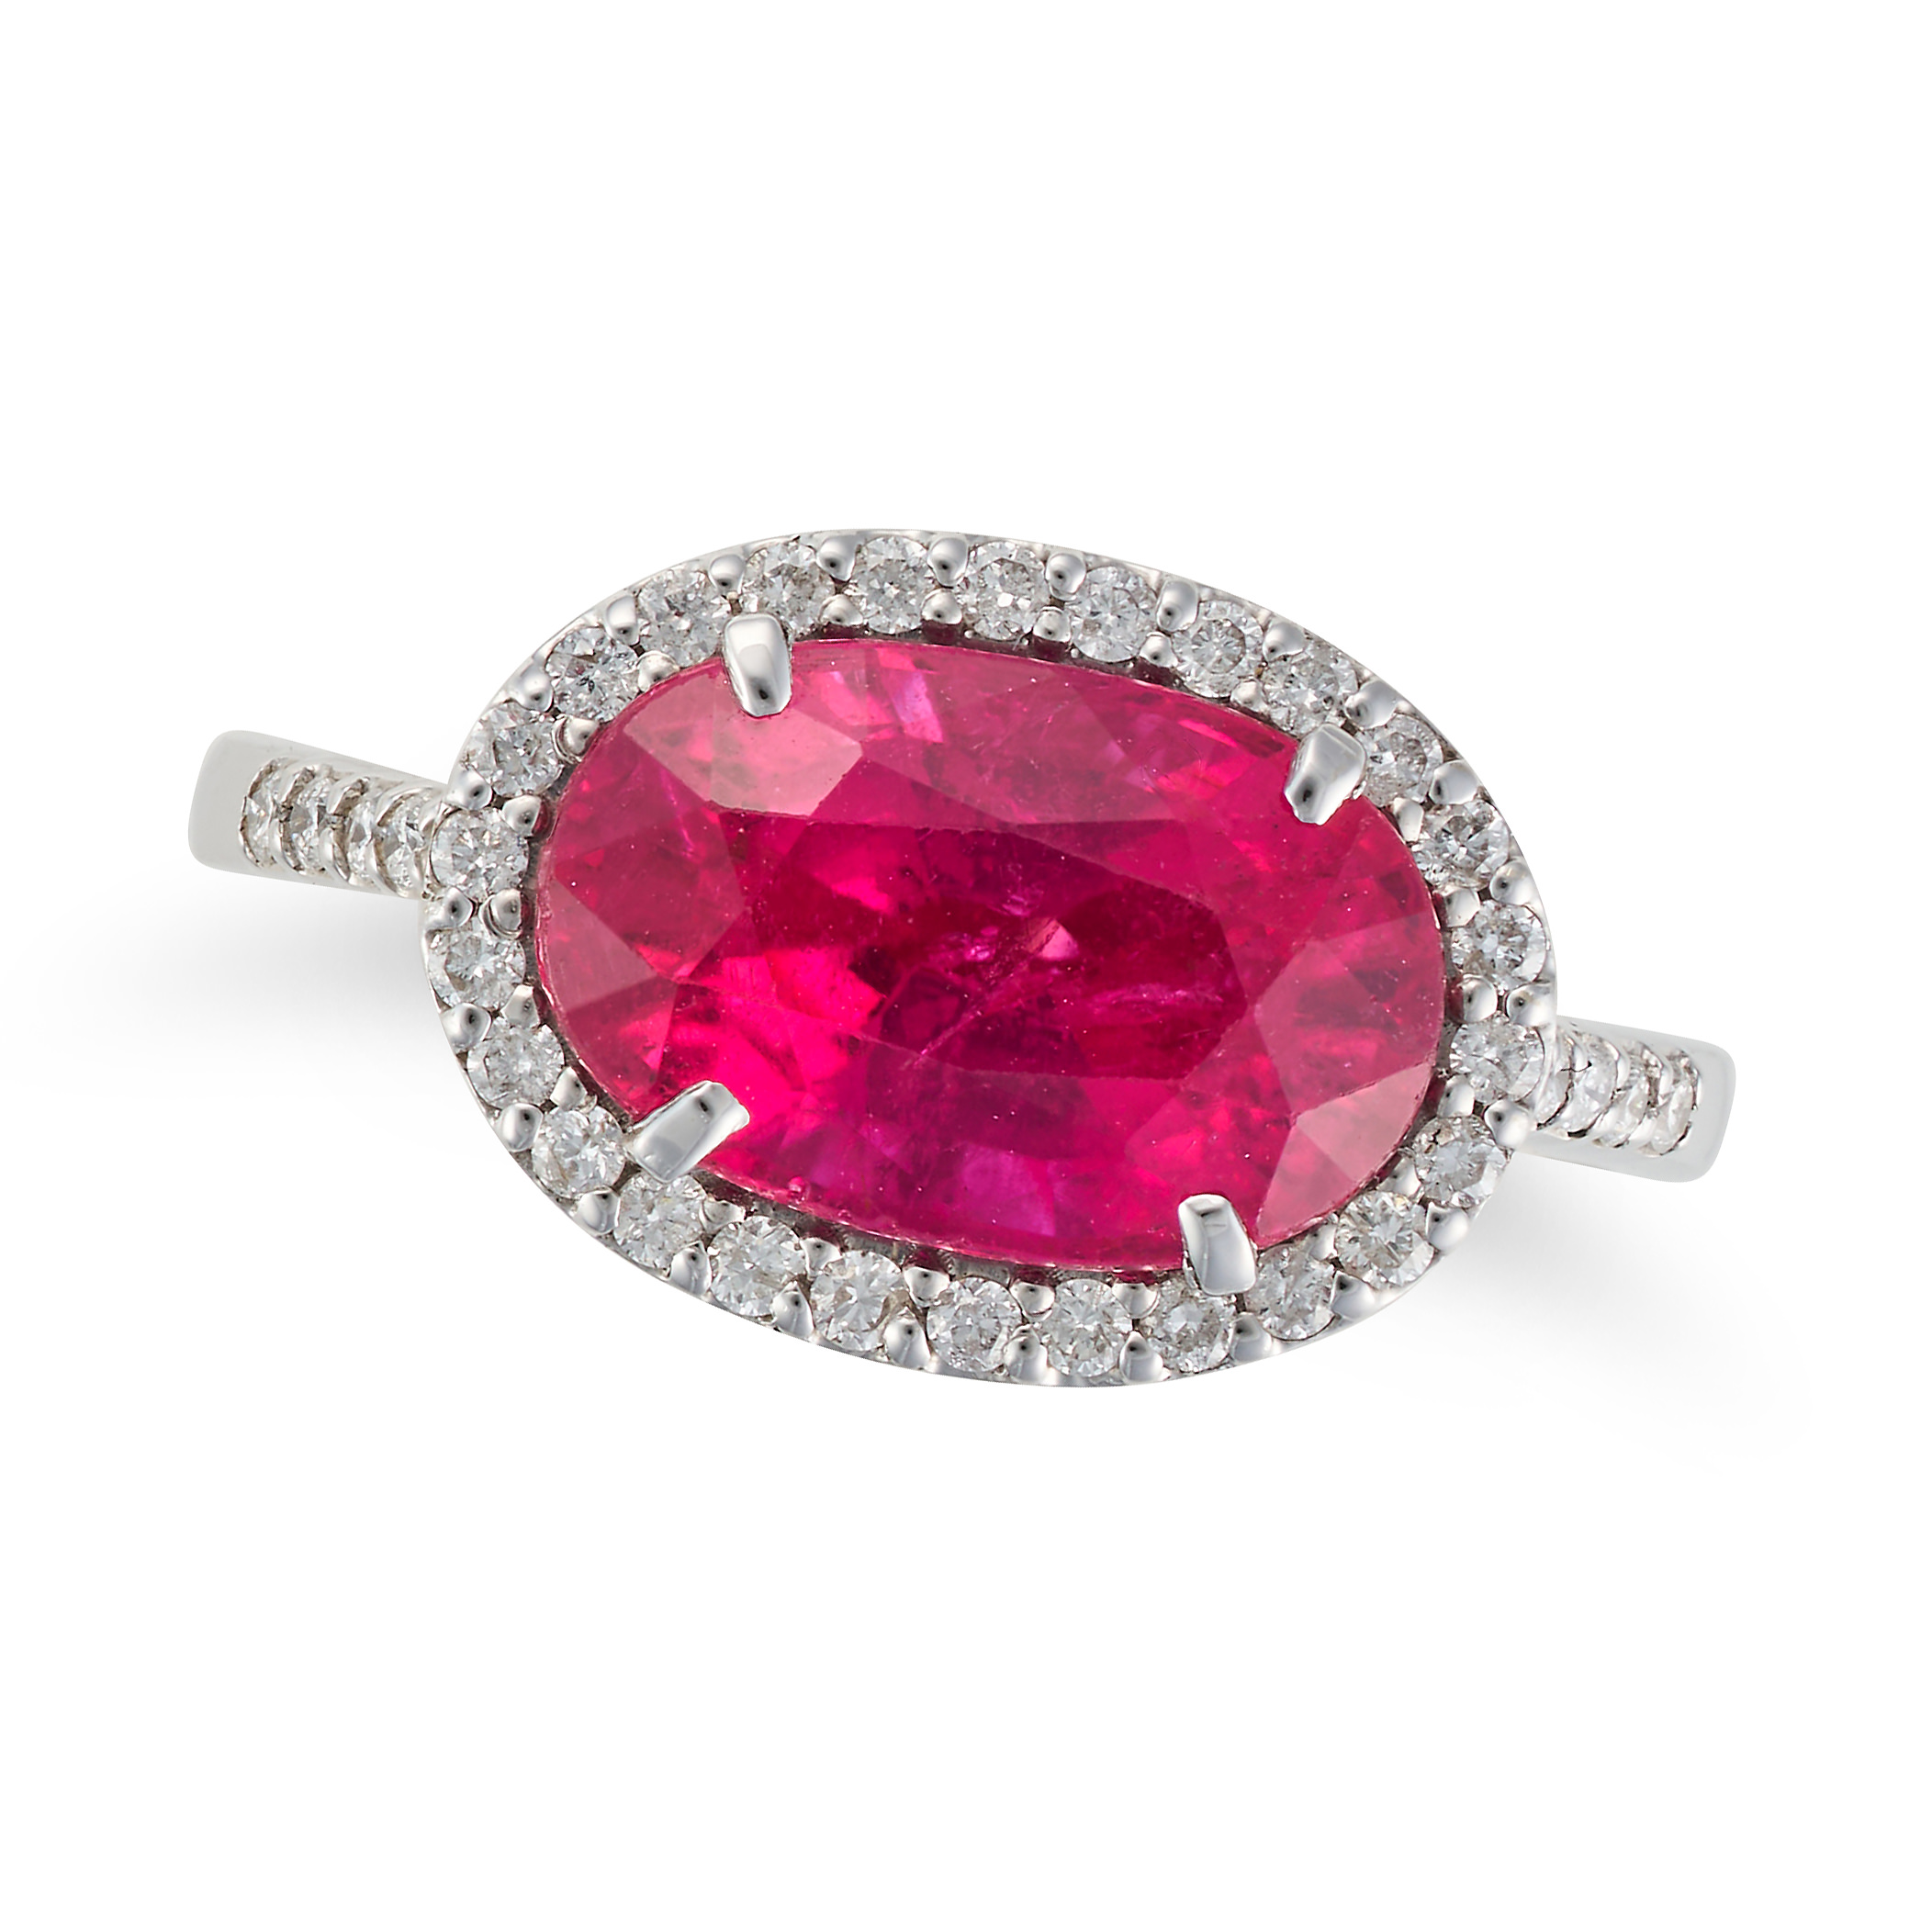 A PINK TOURMALINE AND DIAMOND RING set with an oval cut pink tourmaline of 3.19 carats in a borde...